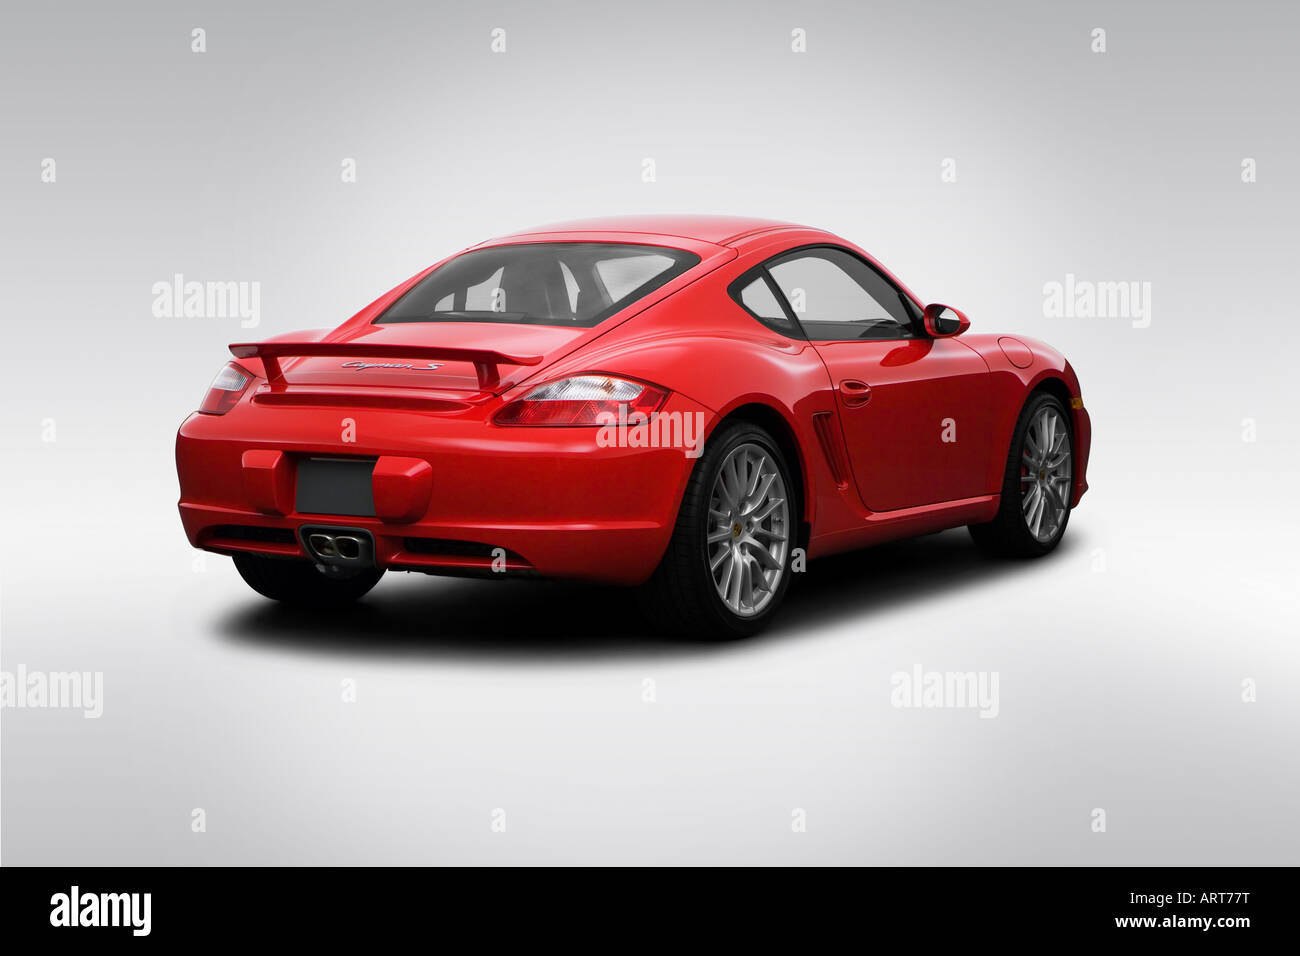 2008 Porsche Cayman S in Red - Rear angle view Stock Photo